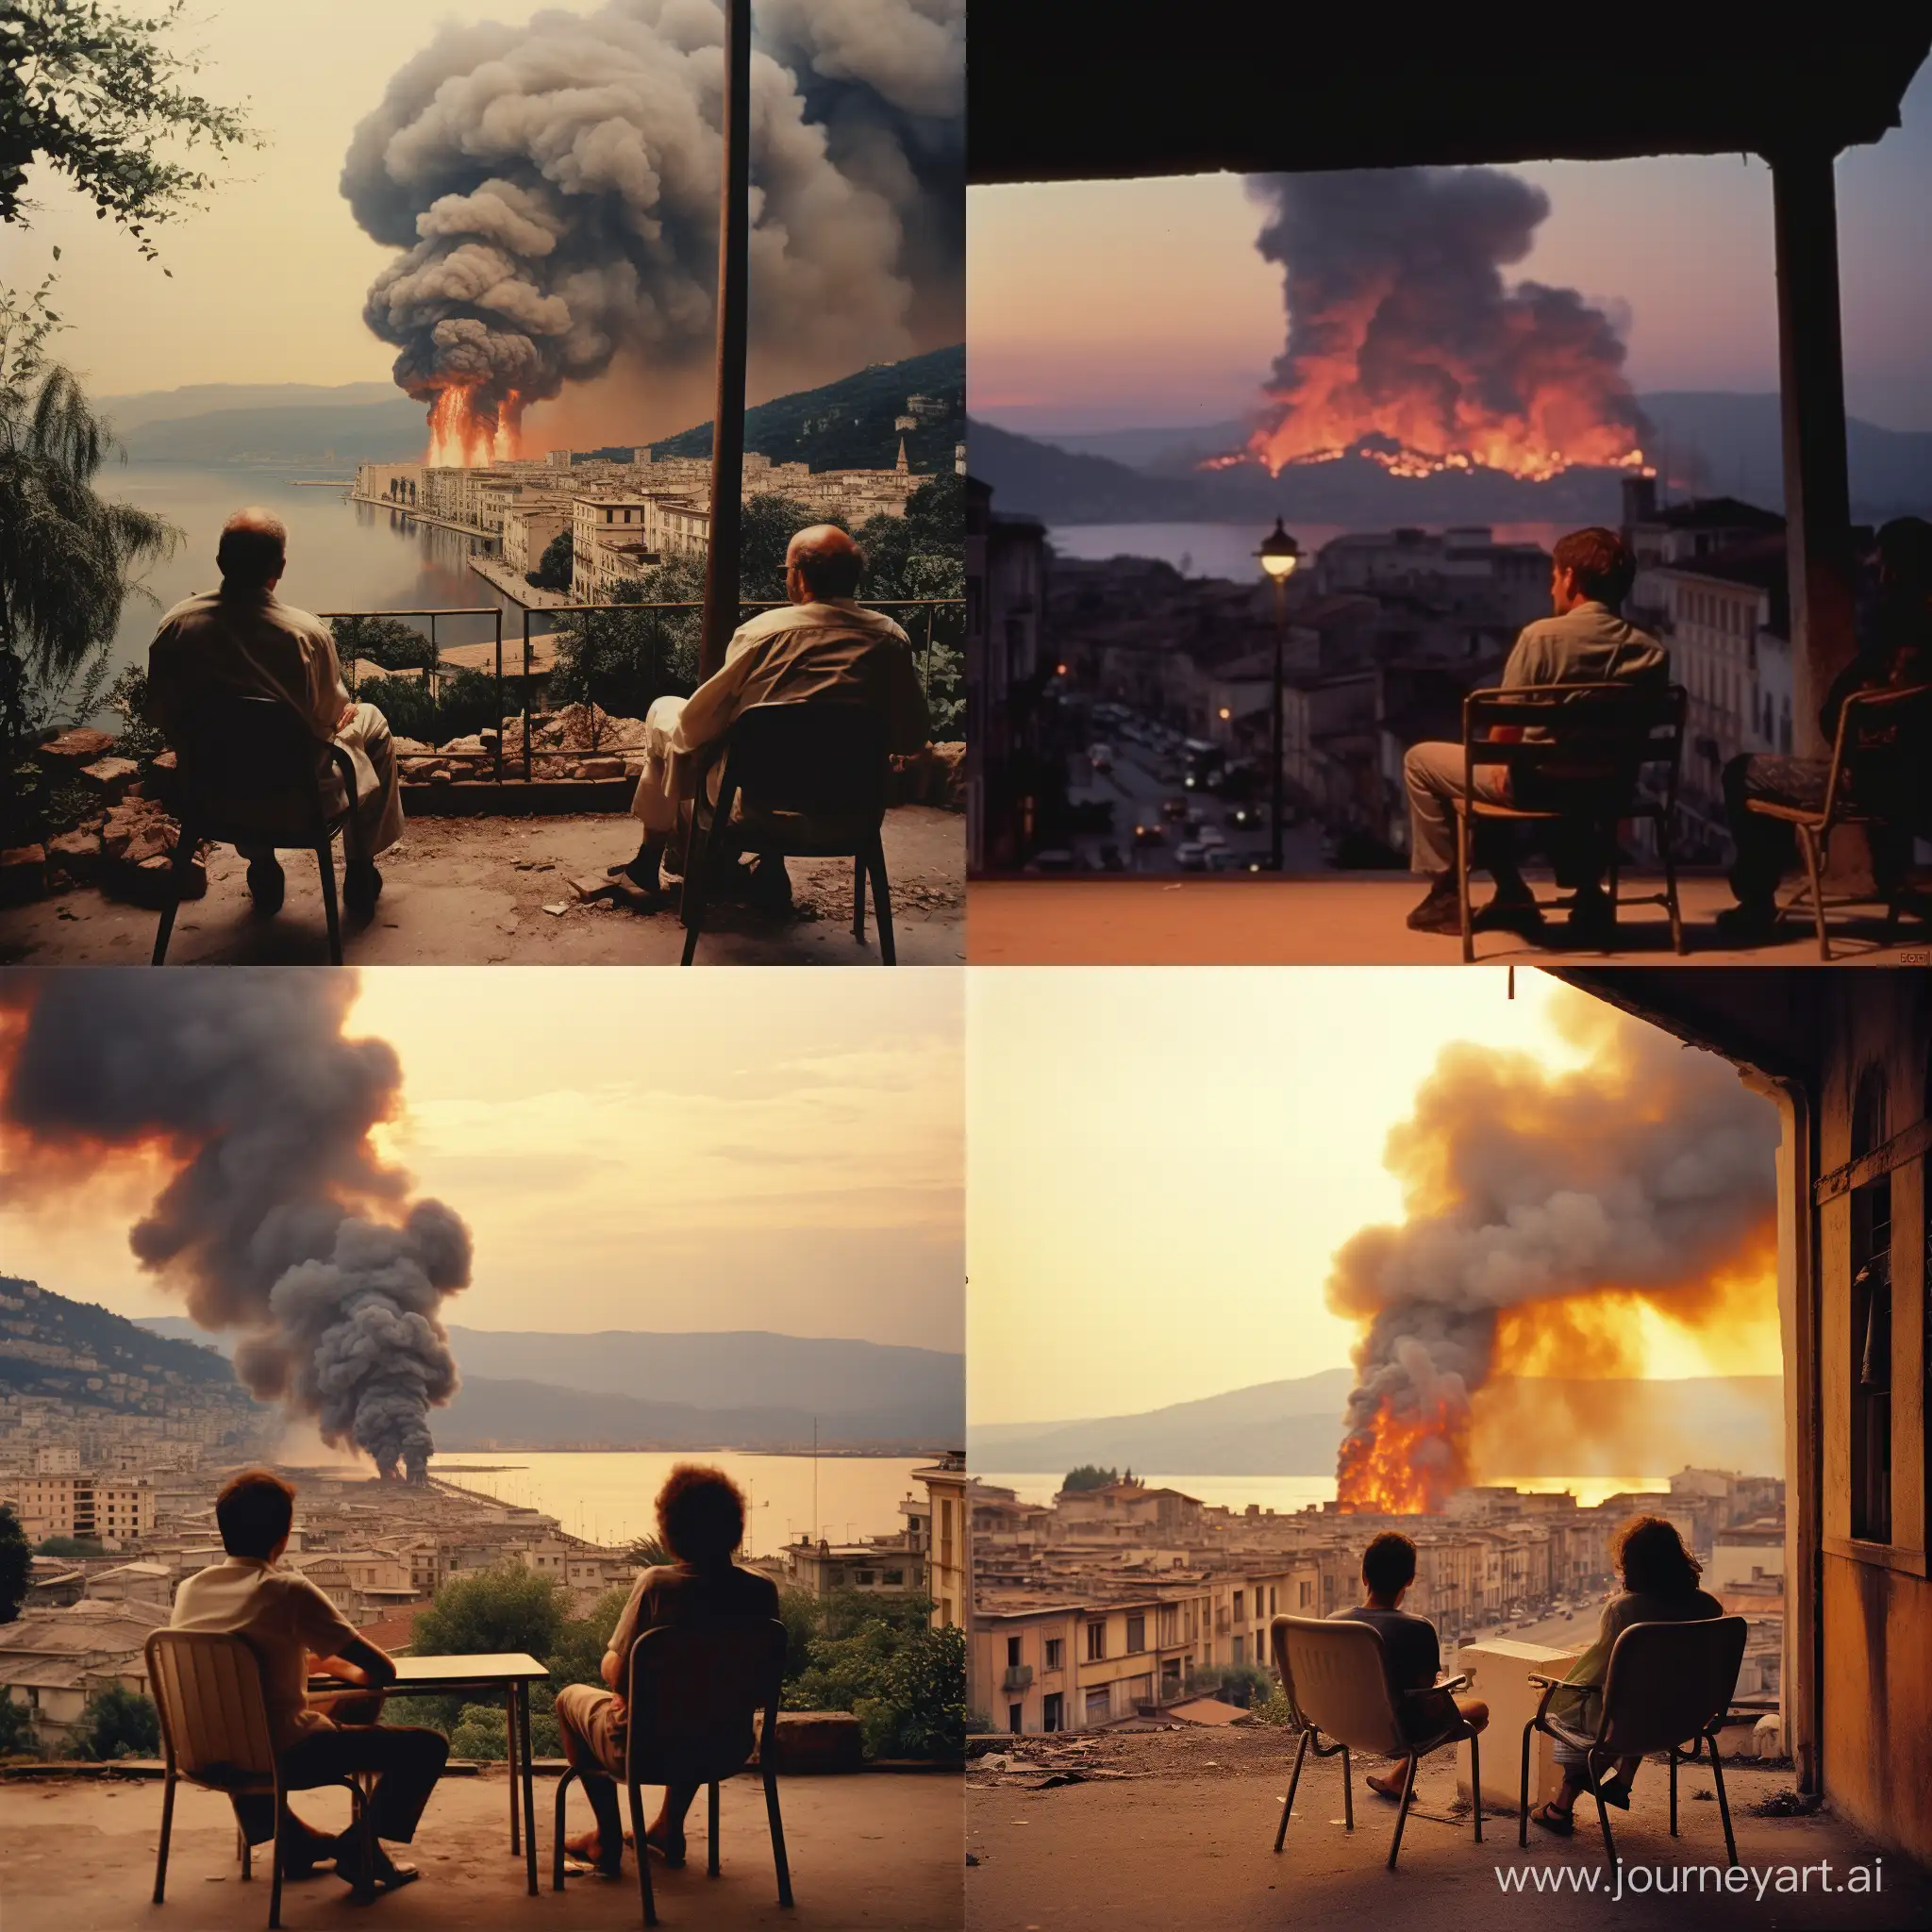 The city of Rijeka in Croatia during the 1980s, there is a war happening in the background while two men are sitting on chairs outside a coffee shop and watching it happen. The Rijeka Clock tower is seen in the distance burning down